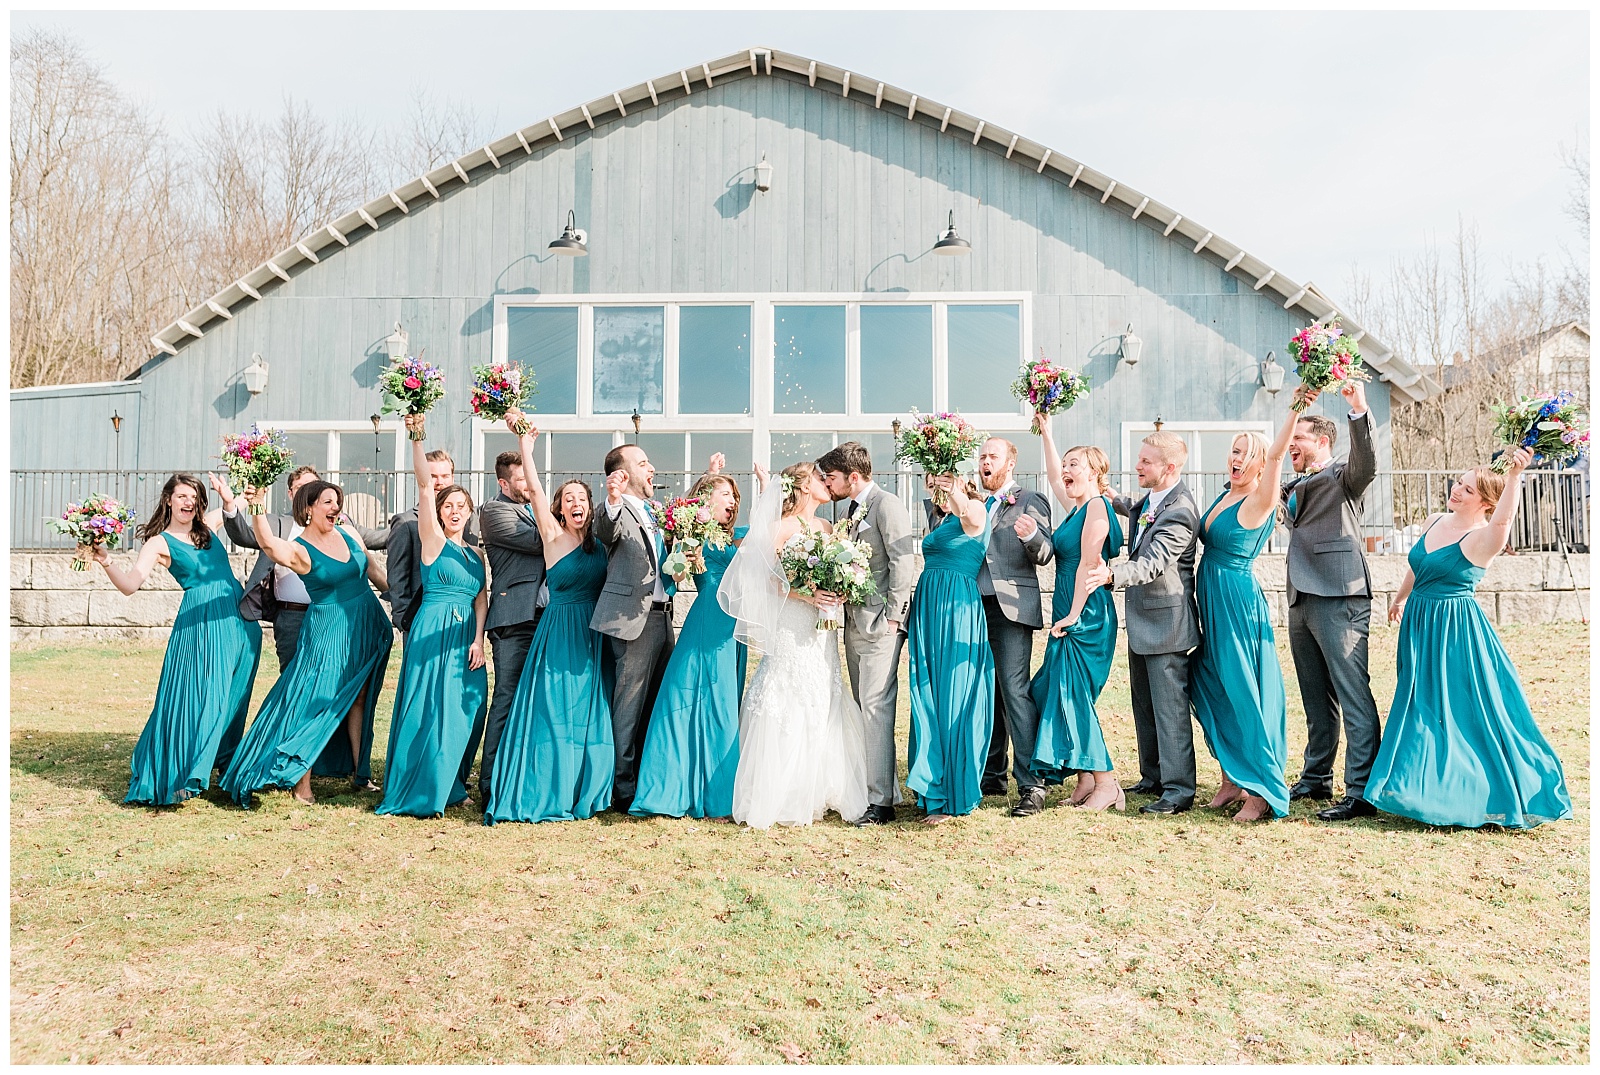 Bride and groom kissing and bridal party cheering in bright colors at the Lake House Inn.